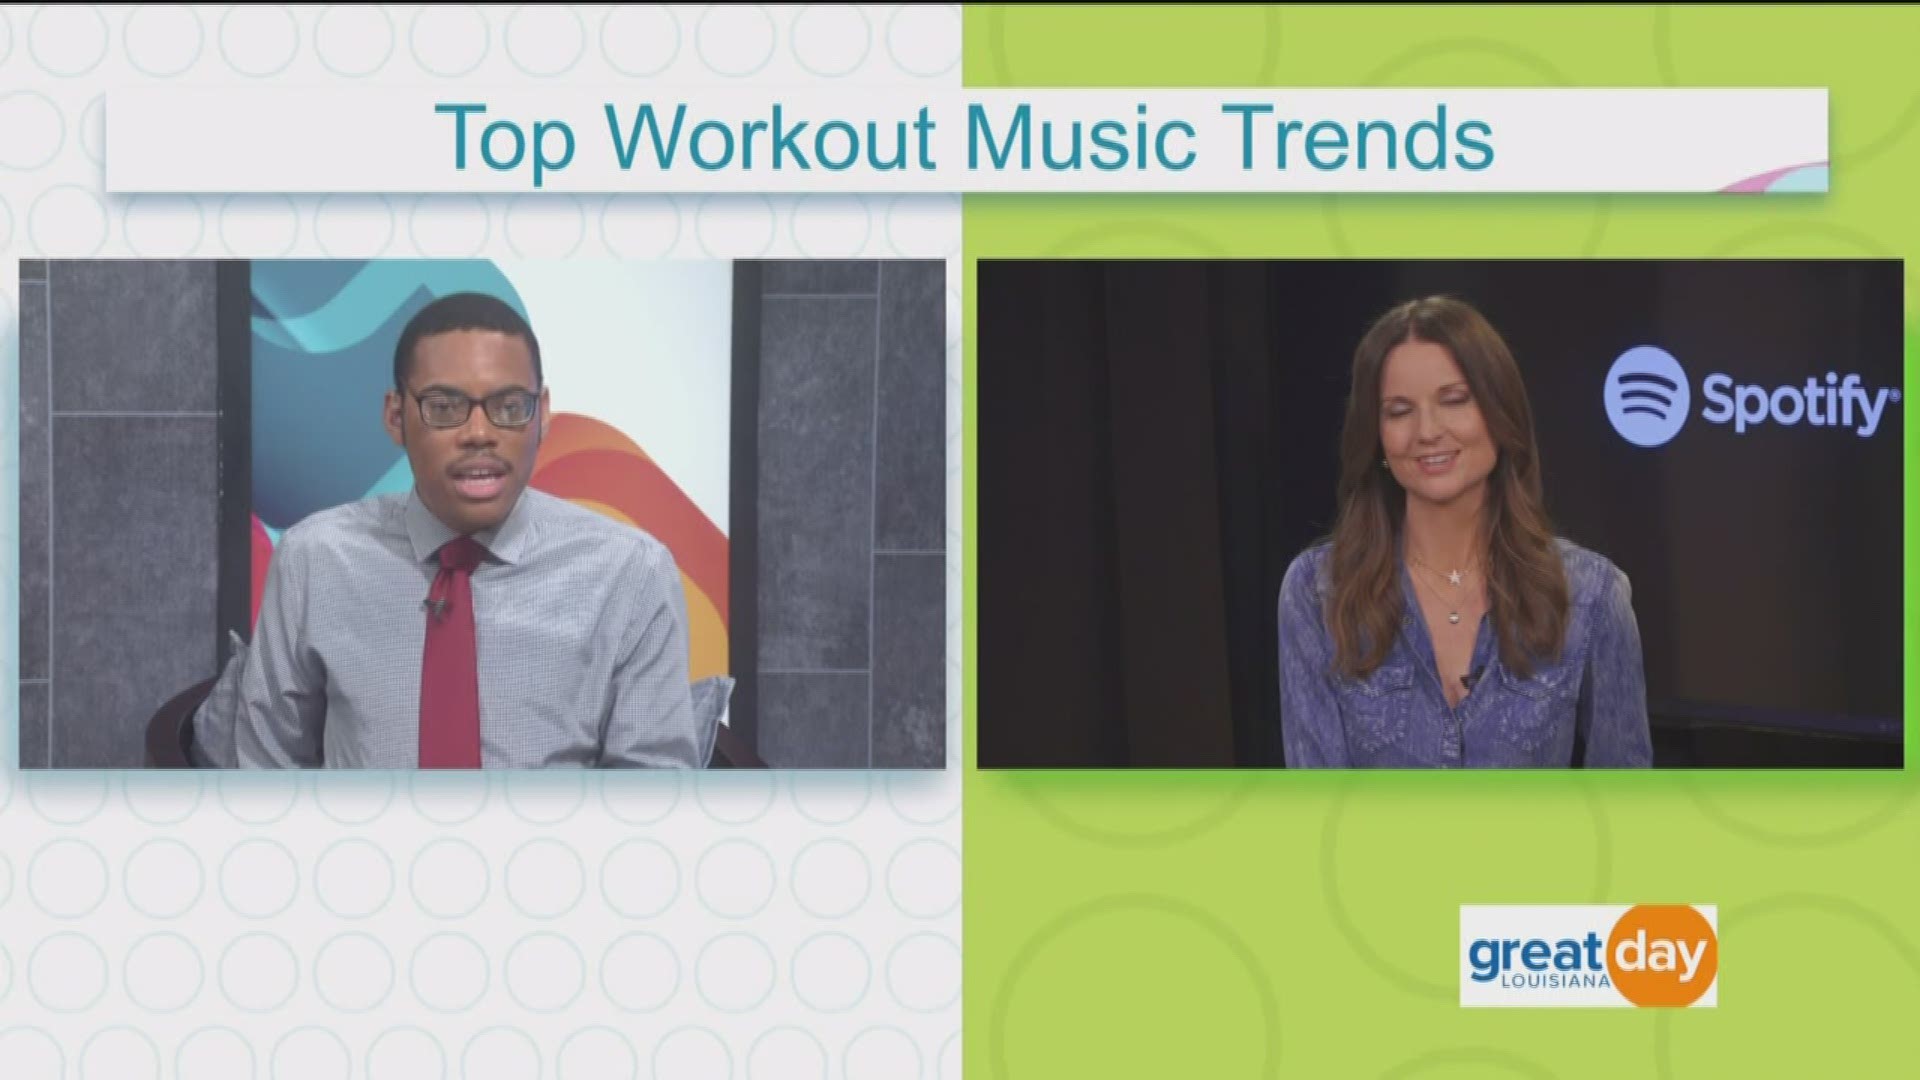 Trends expert, Shannon Cook, discussed the top music trends for working out in 2020.